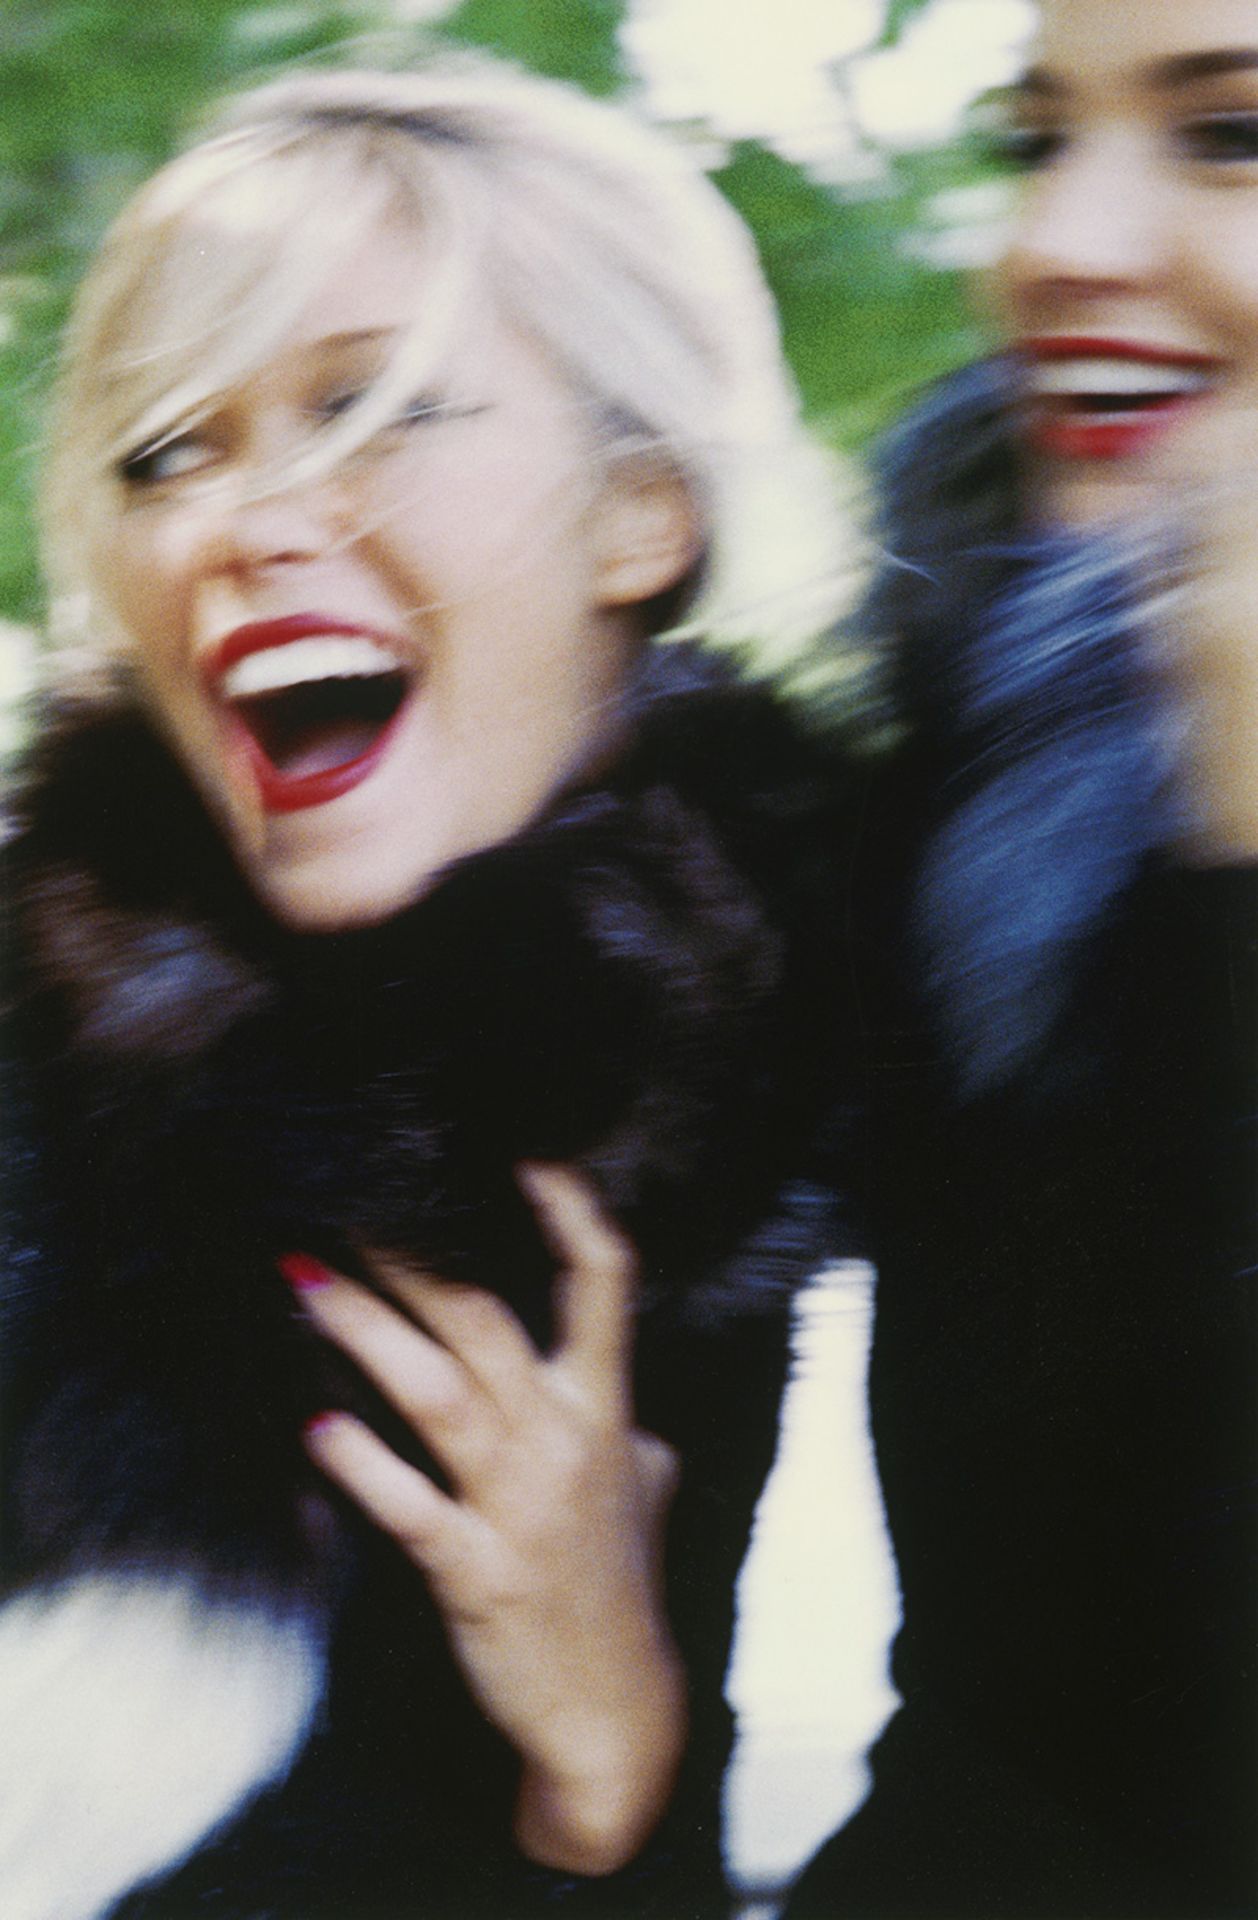 Haase, Esther: Two Girls Laughing in Central Park NY